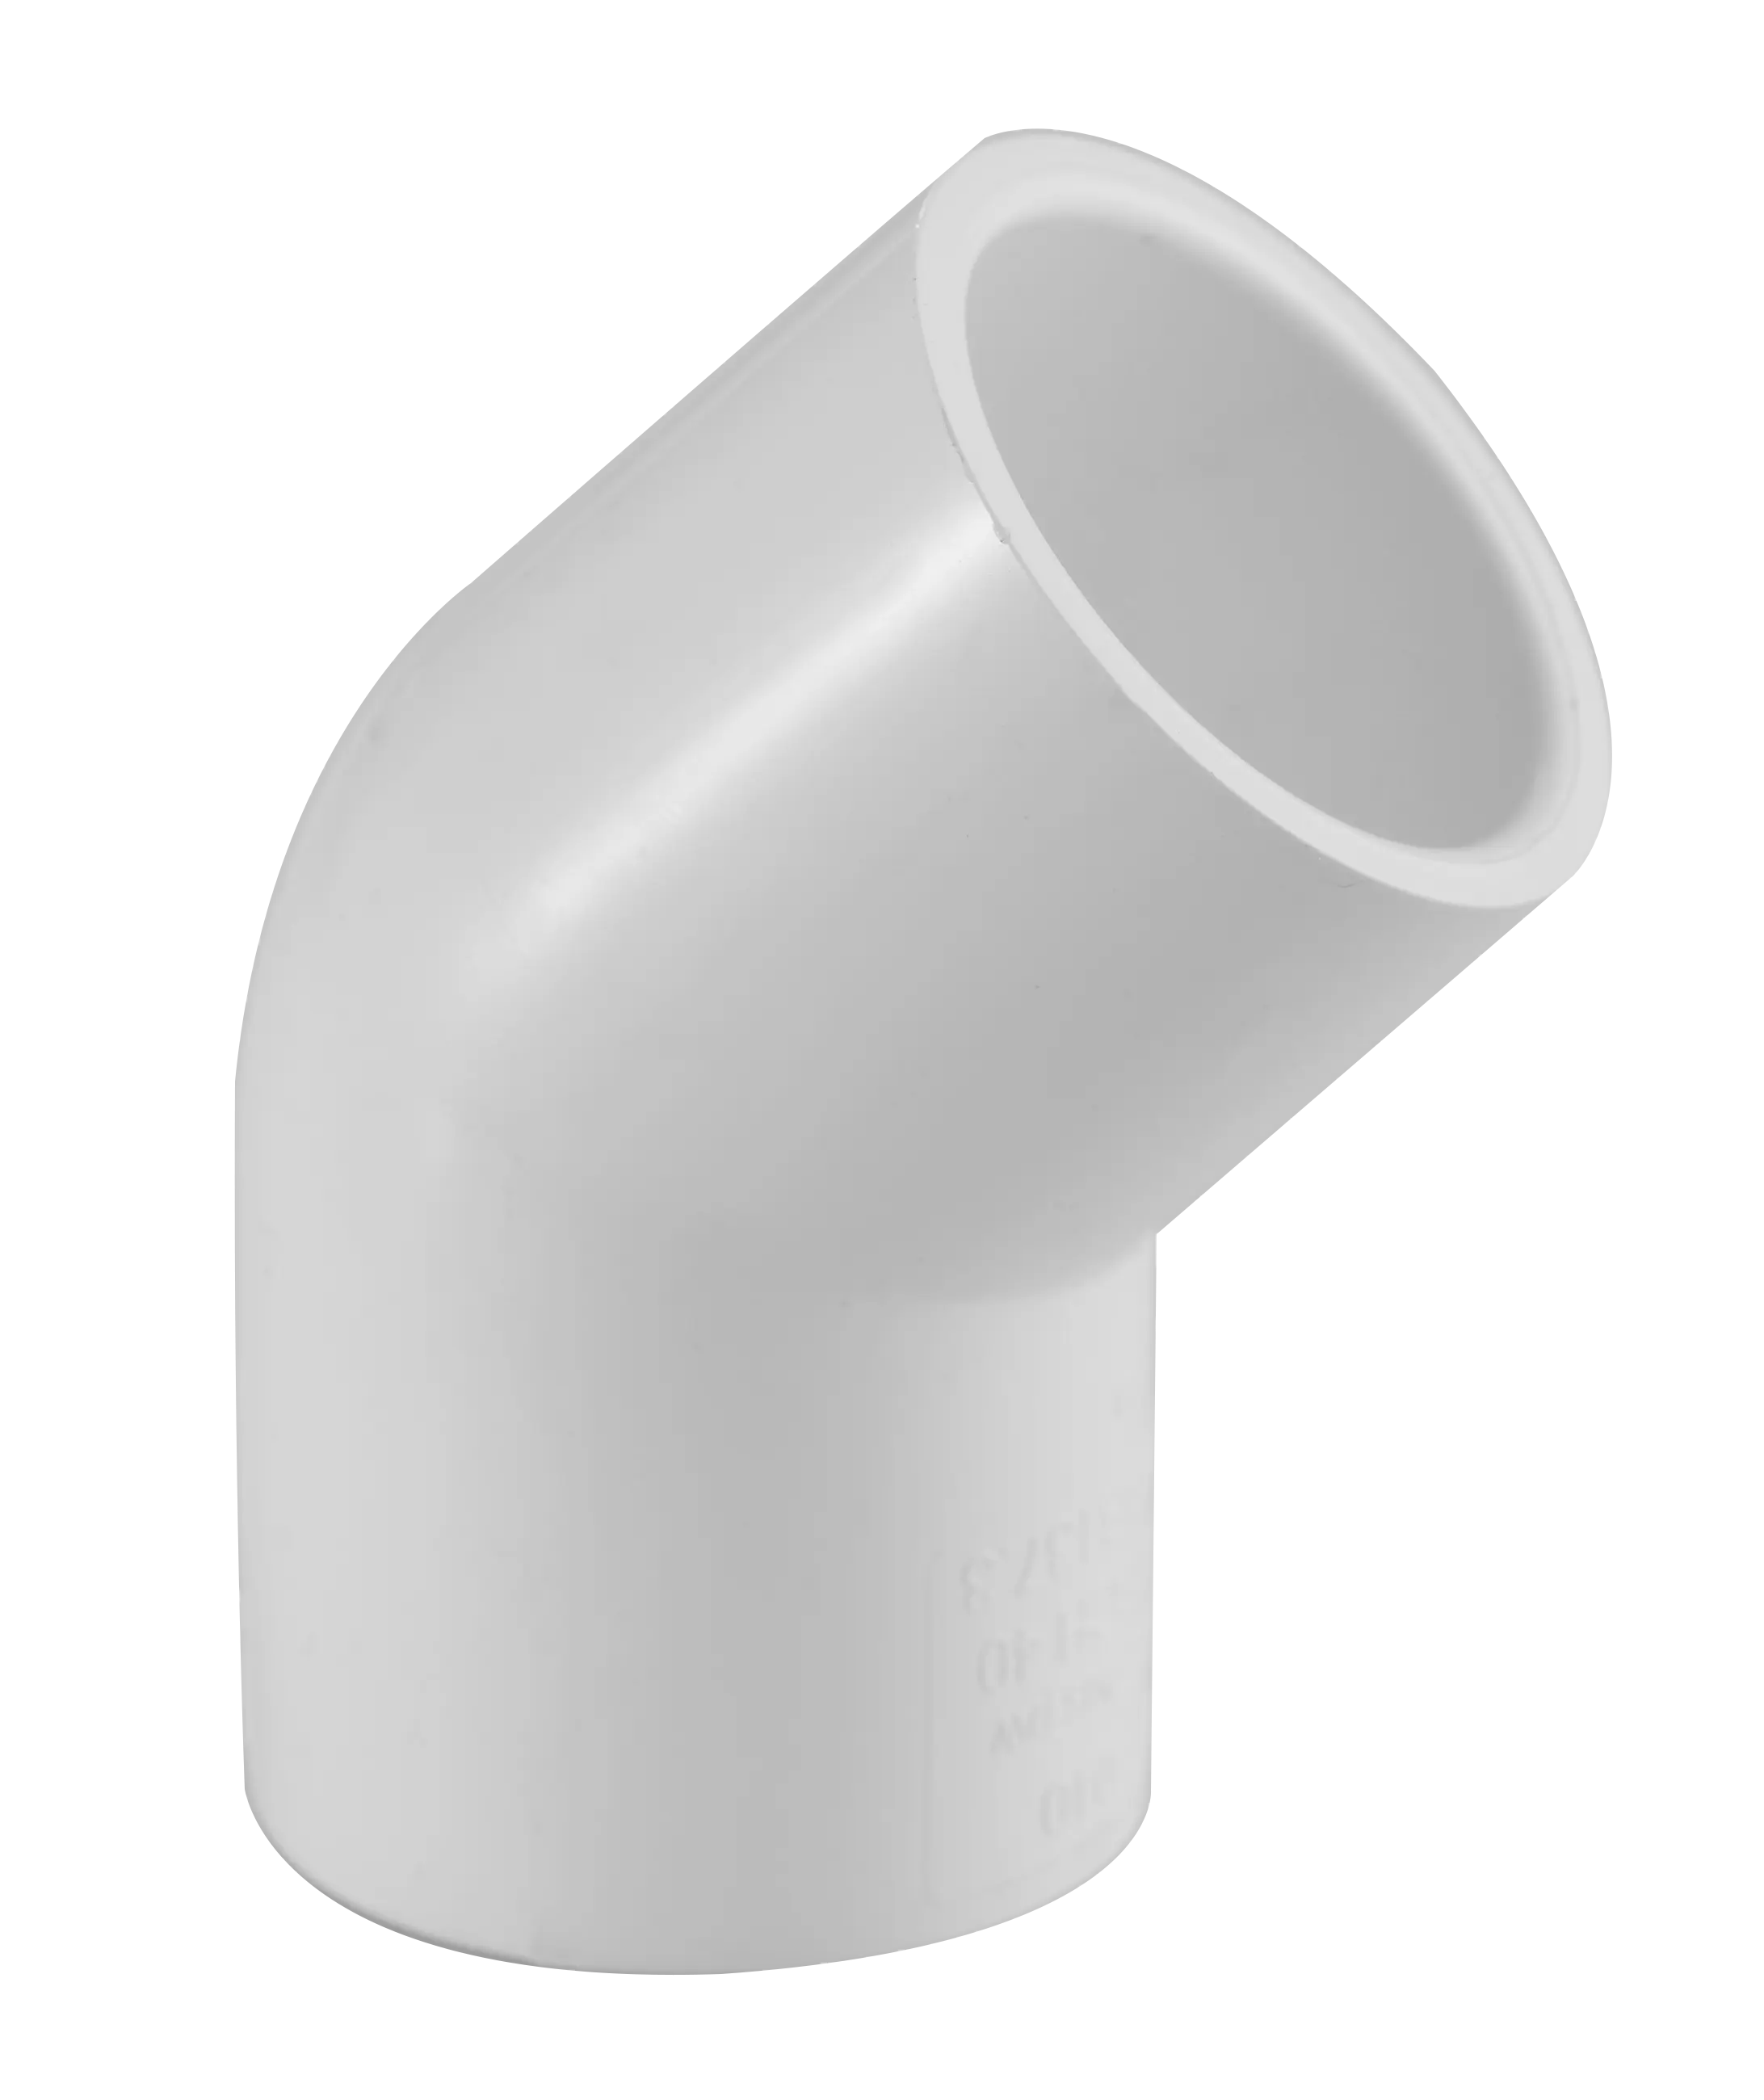 China Manufacture High Quality pvc Male Thread Adaptor Fittings For Water Supply Pvc Pipe